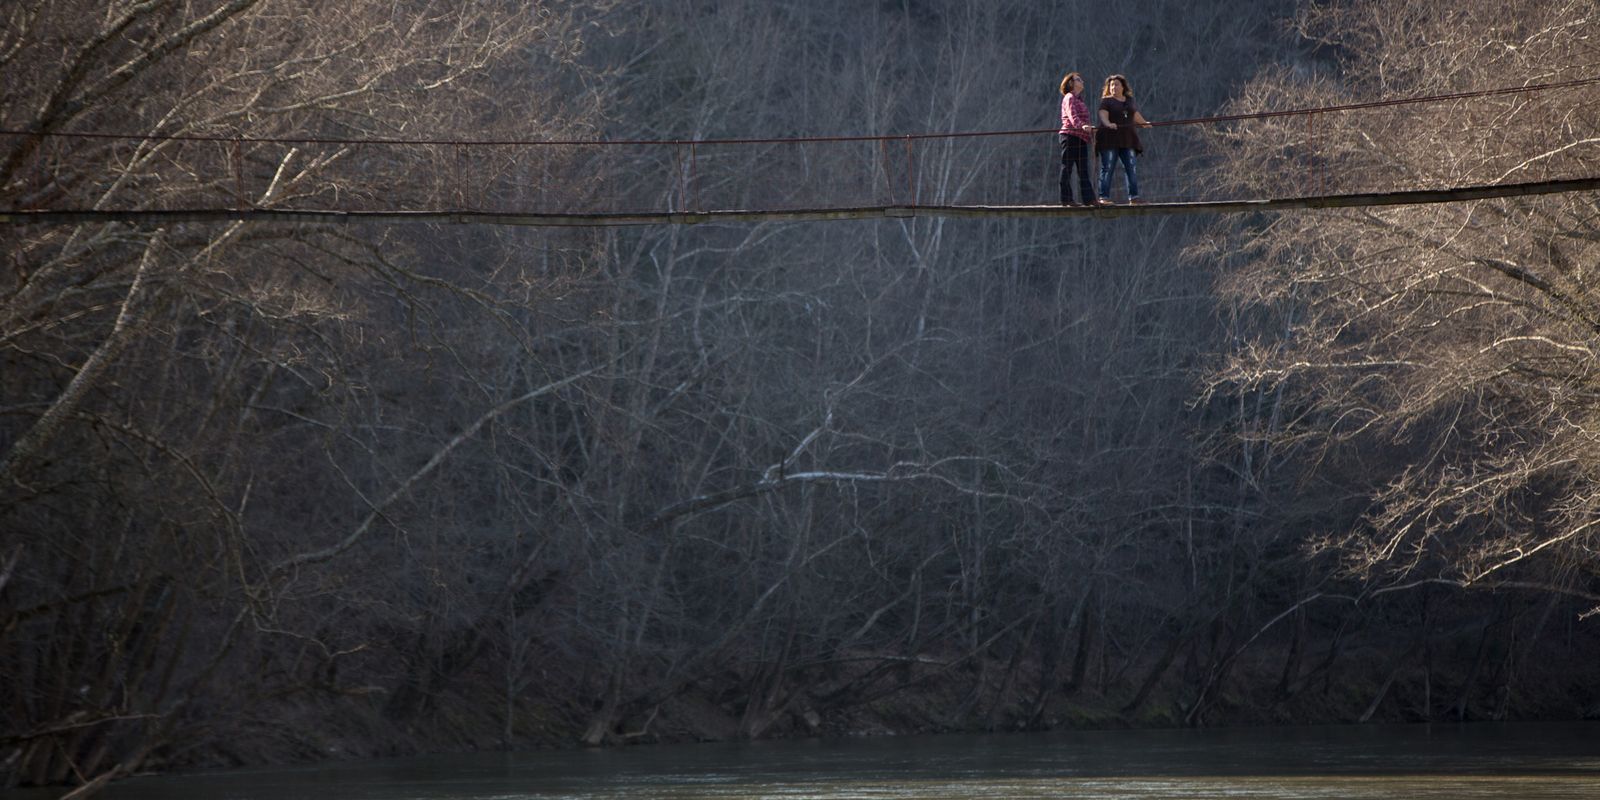 Photo of women standing on a bridge spanning a river.  The Rocky Branch Bridge crosses the South Fork of the Kentucky River and connects communities to the outside world in the event of flooding. March 9, 2017 By Nancy Andrews